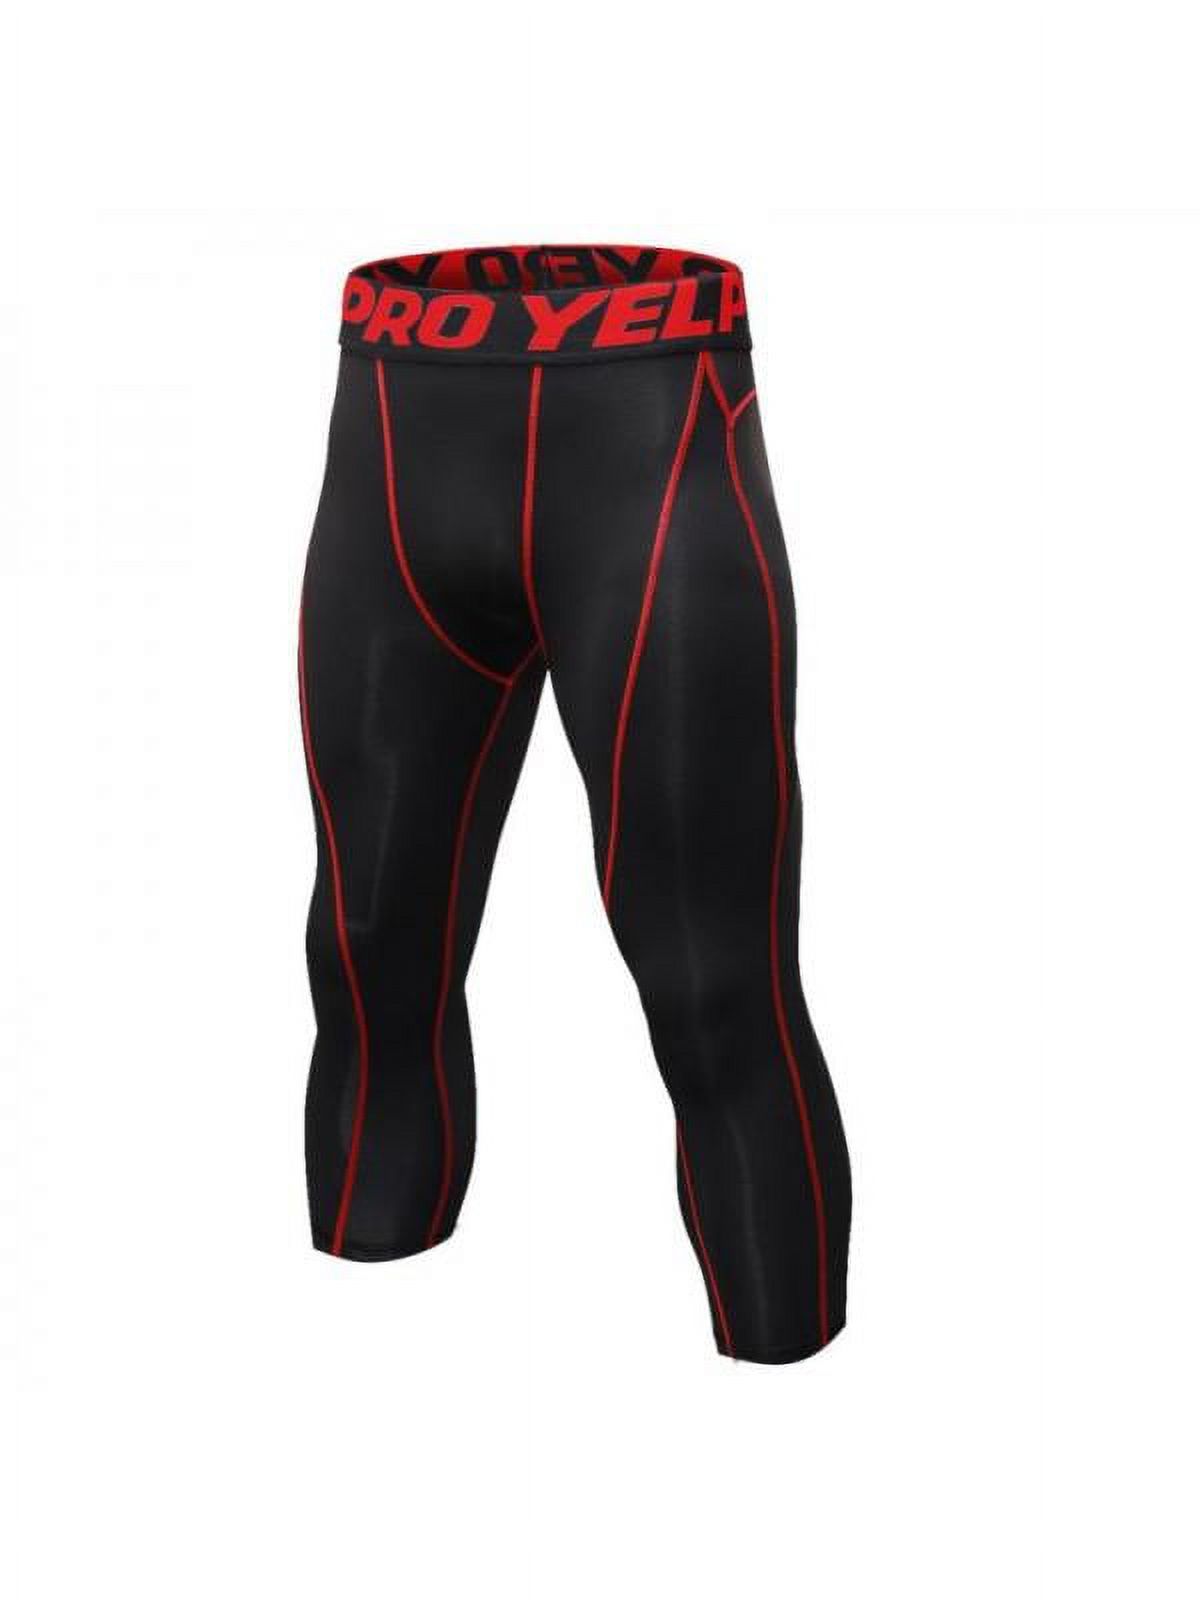 Lavaport 3/4 Men’s Compression Sports Tights Pants Baselayer Running Leggings - image 1 of 2